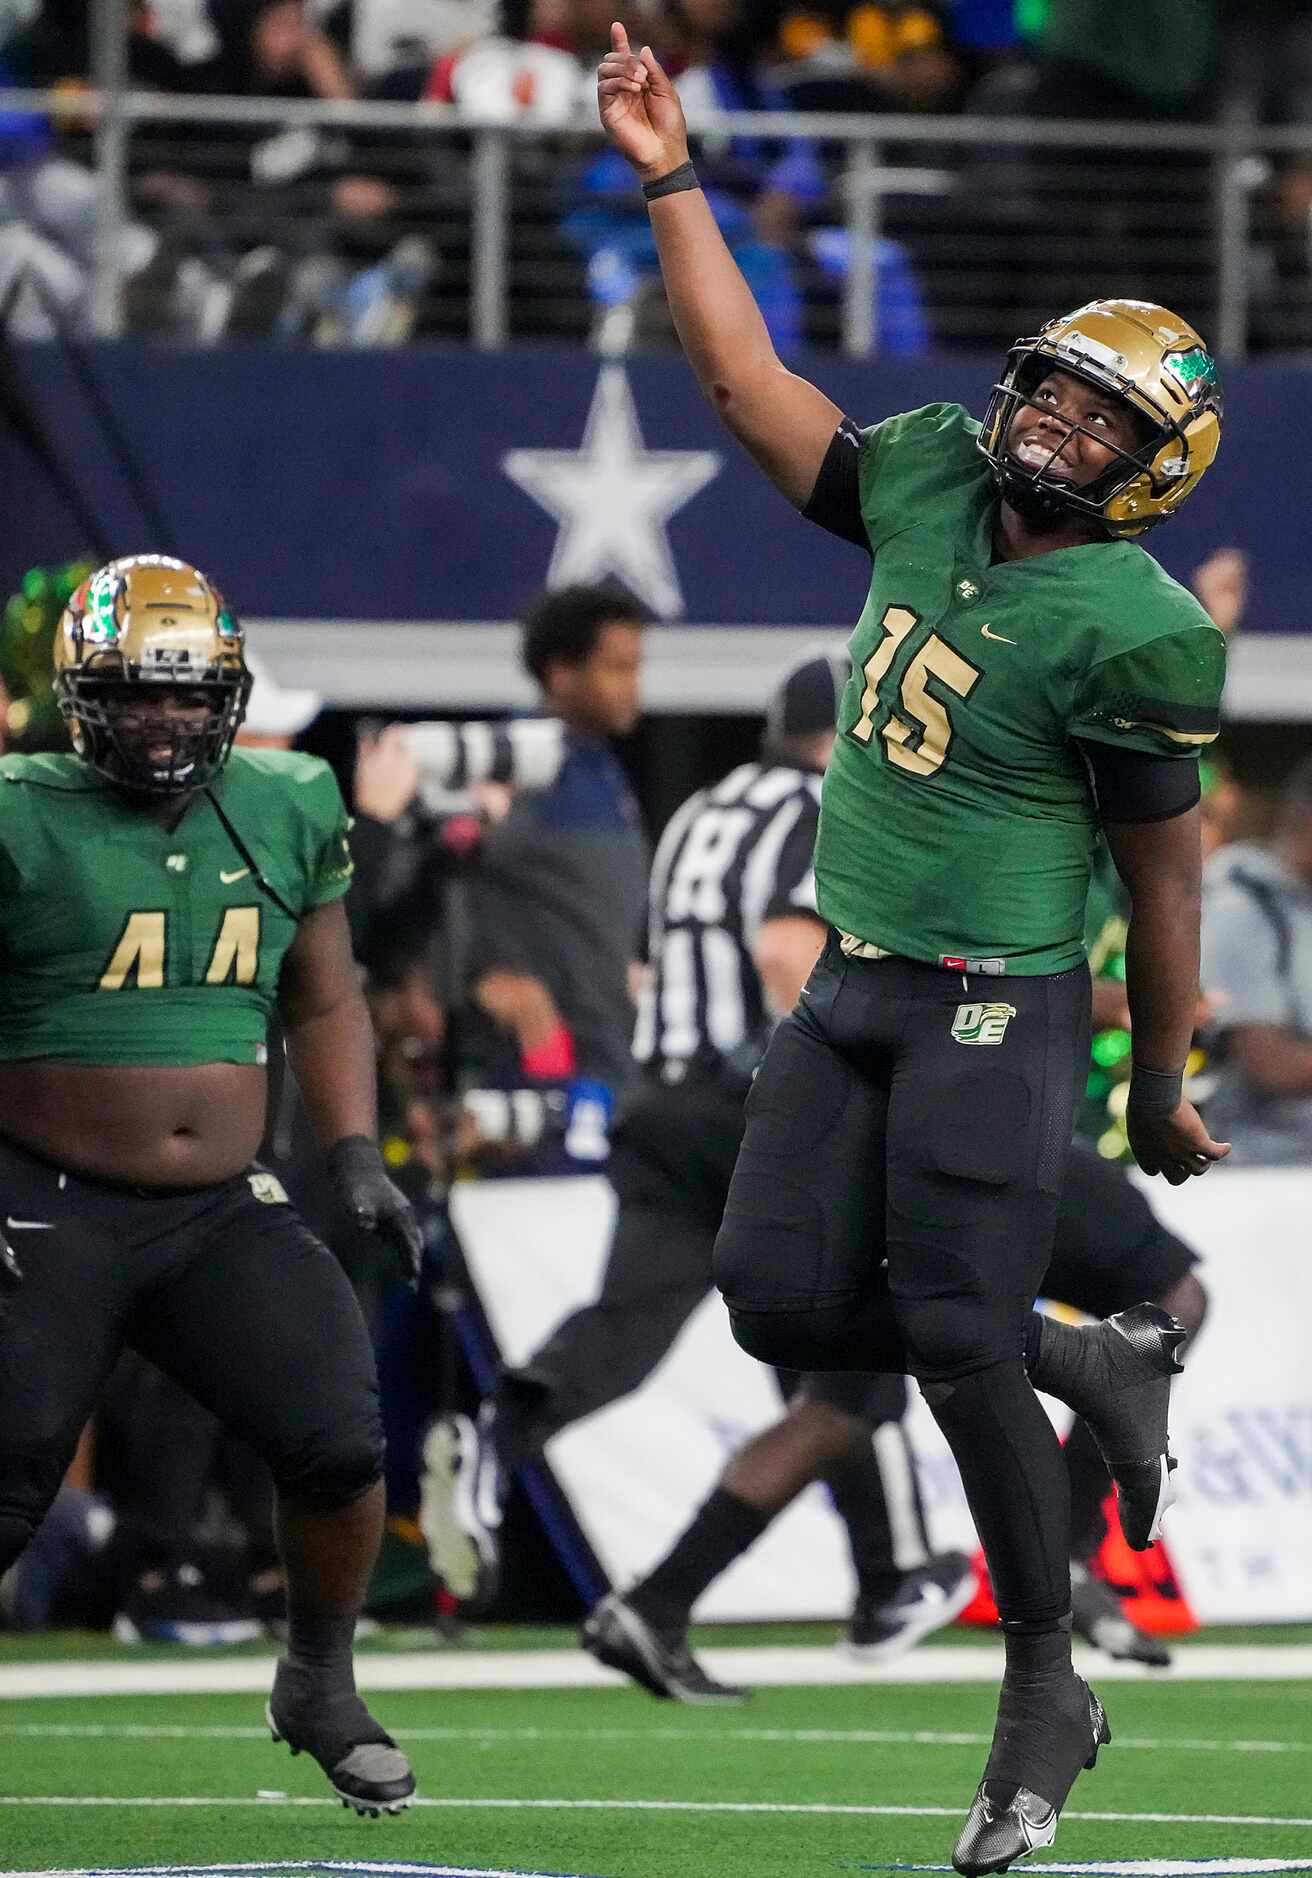 DeSoto quarterback Darius Bailey (15) celebrates after throwing a touchdown pass during the...